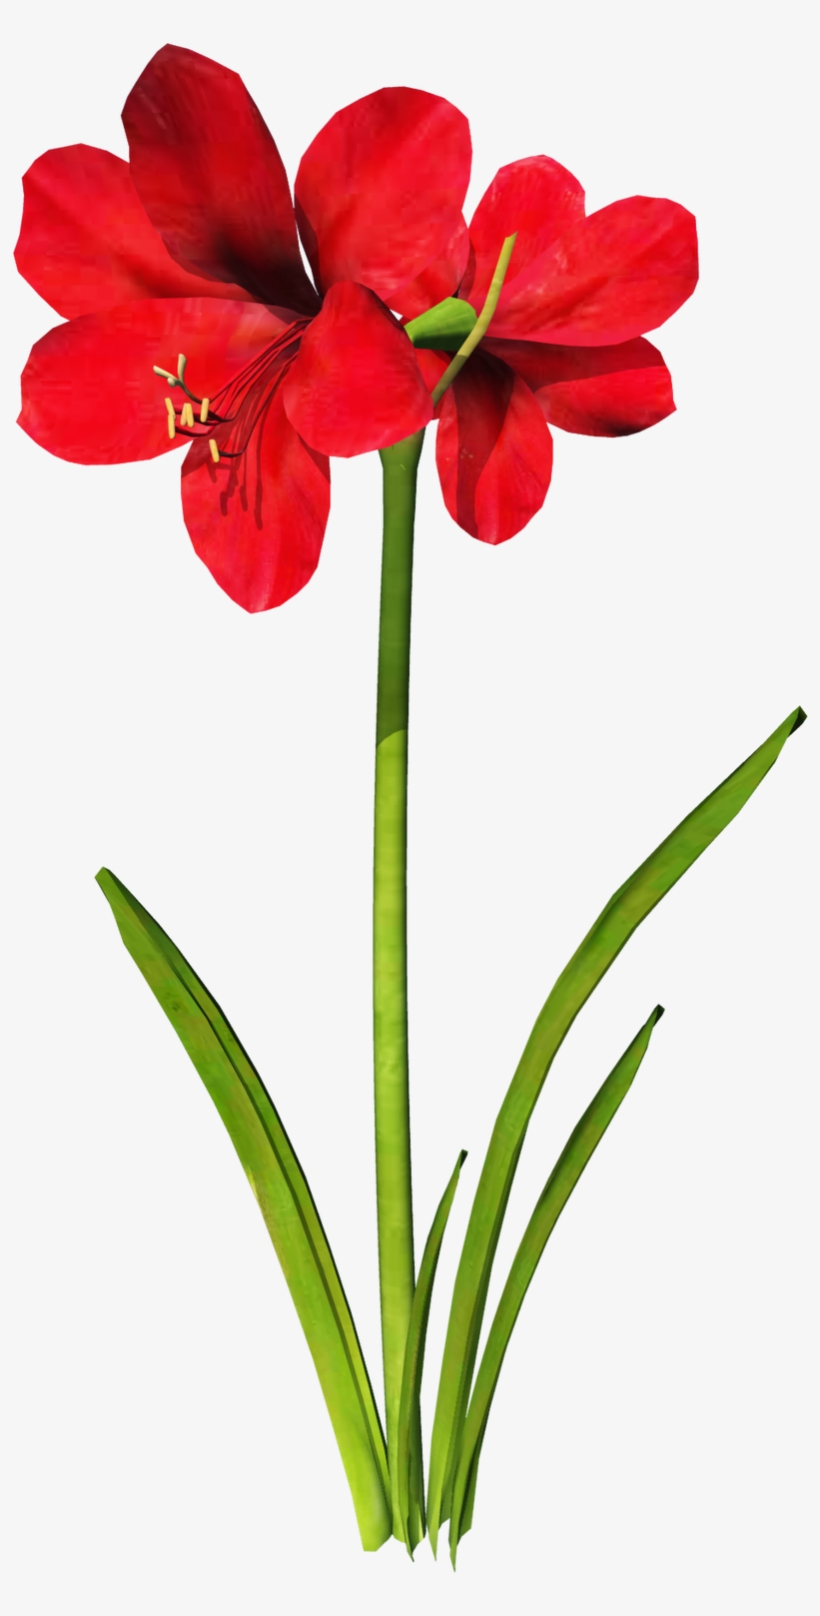 Carnation Flower Clipart At Getdrawings - Amaryllis Clip Art, transparent png #289397